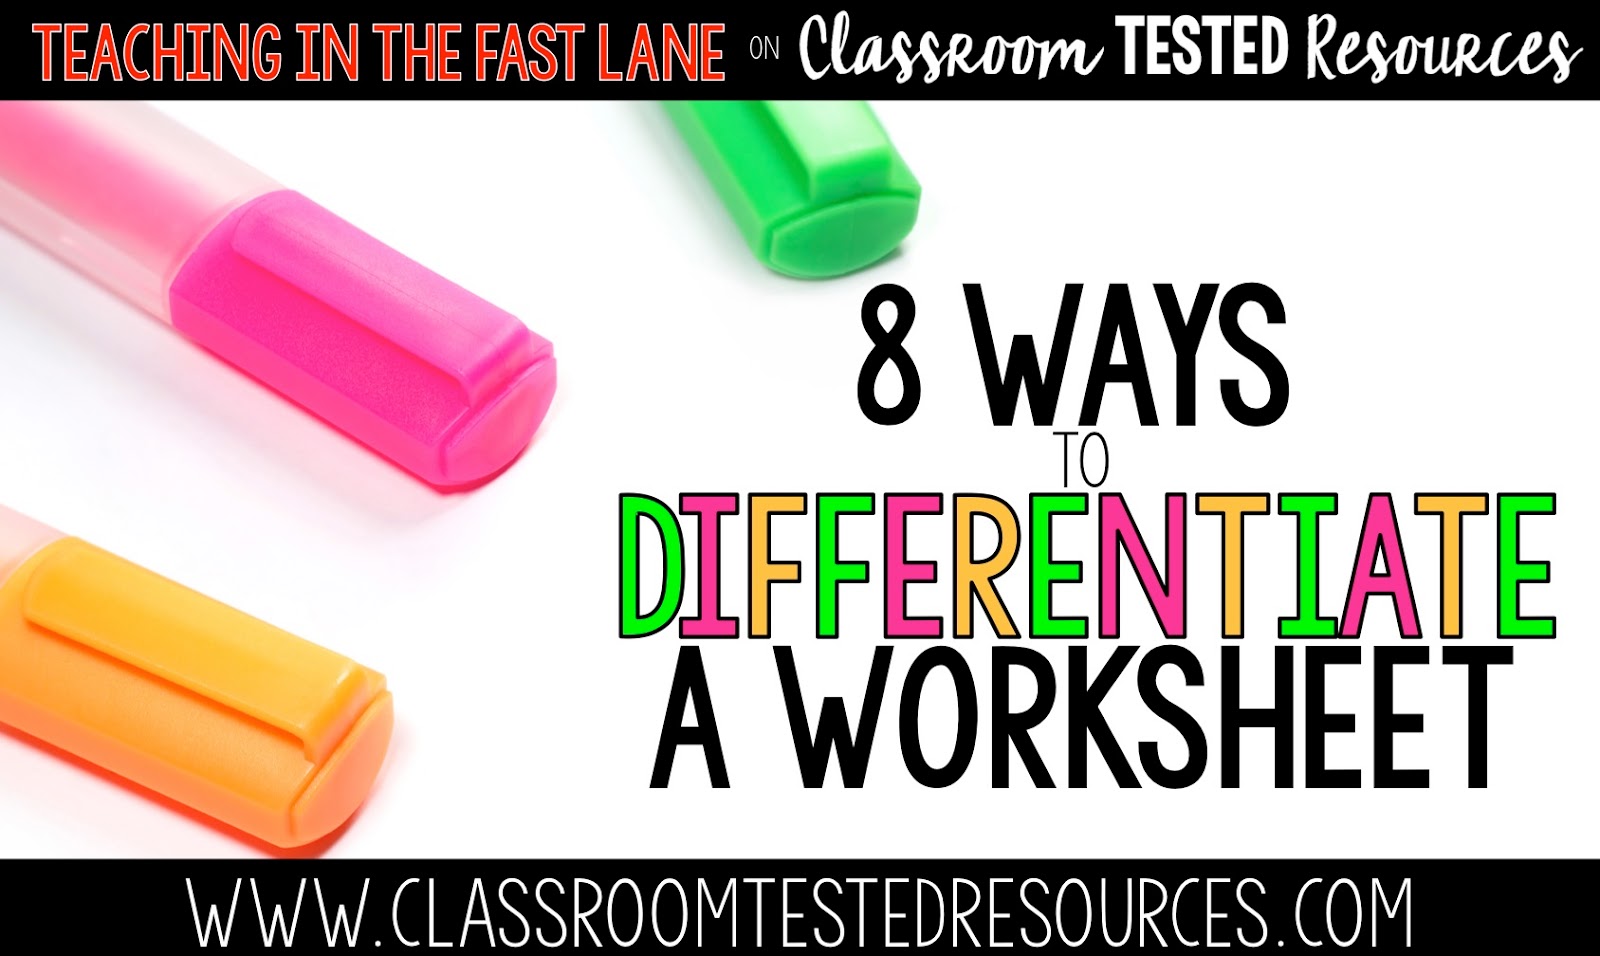 Eight ways to differentiate worksheets in your classroom. The last one has been a life saver, and is very empowering for the students! 